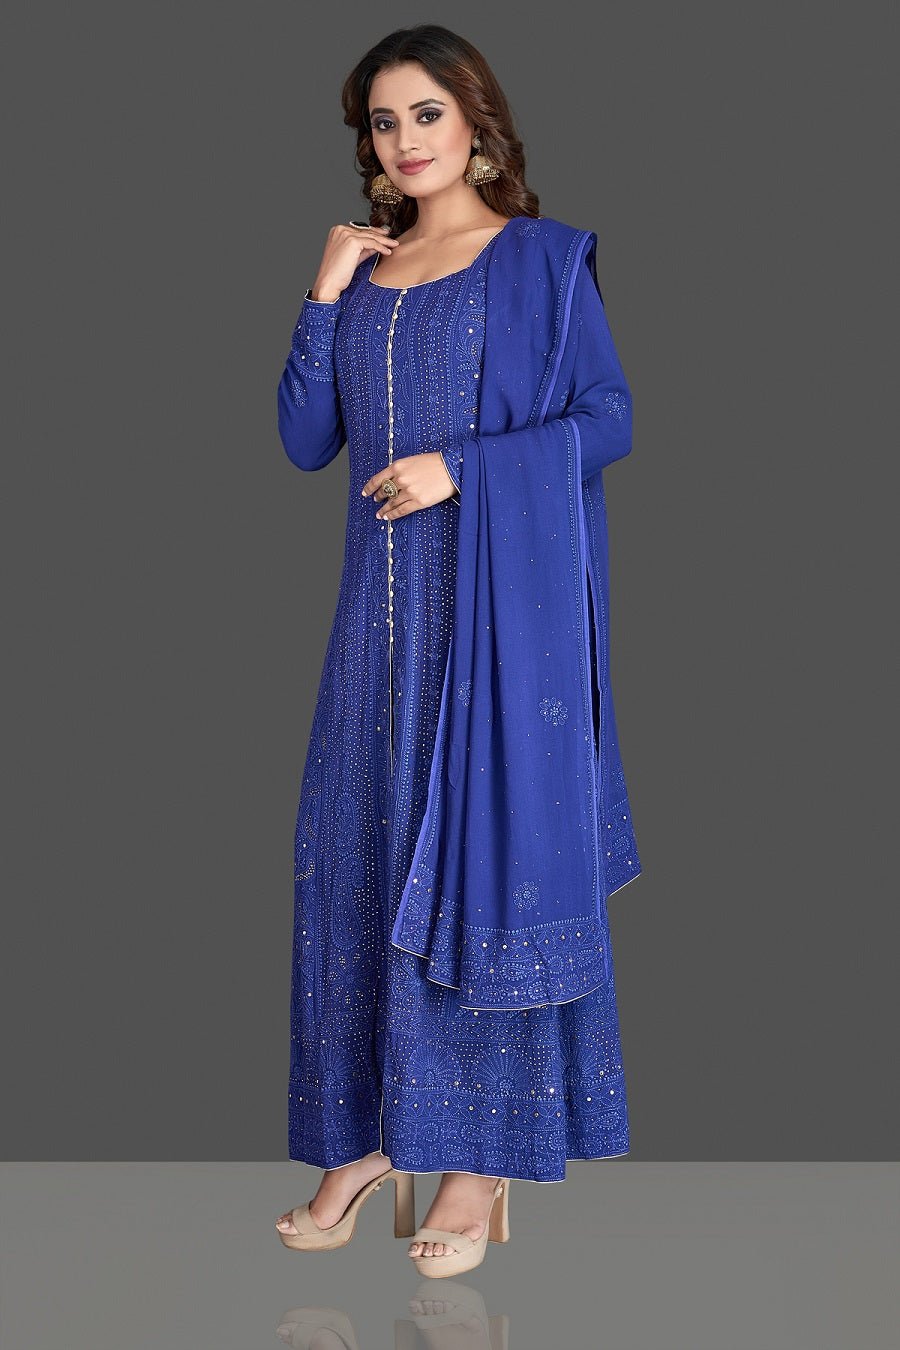 Buy beautiful indigo blue Lucknowi chikankari work Anarkali suit online in USA. Flaunt your sartorial choice with beautiful embroidered Anarkali, sharara suits, designer lehengas, designer gowns from Pure Elegance Indian saree store in USA.-side